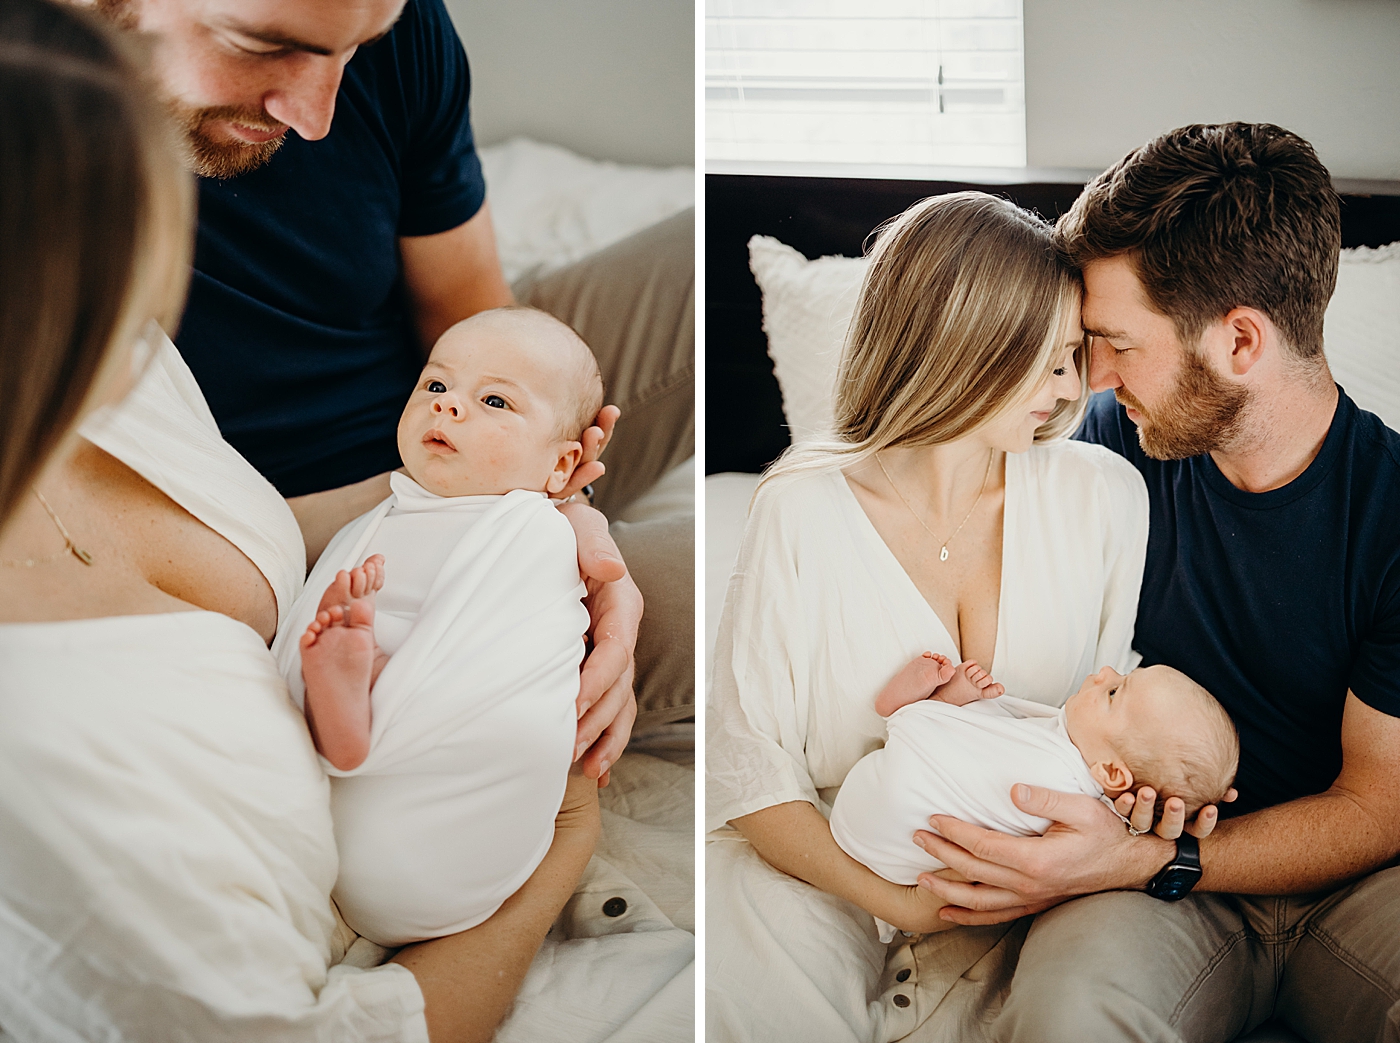 Baby in white swaddle being held by parents who are nuzzling South Florida Newborn Photography captured by South Florida Family Photographer Maggie Alvarez Photography